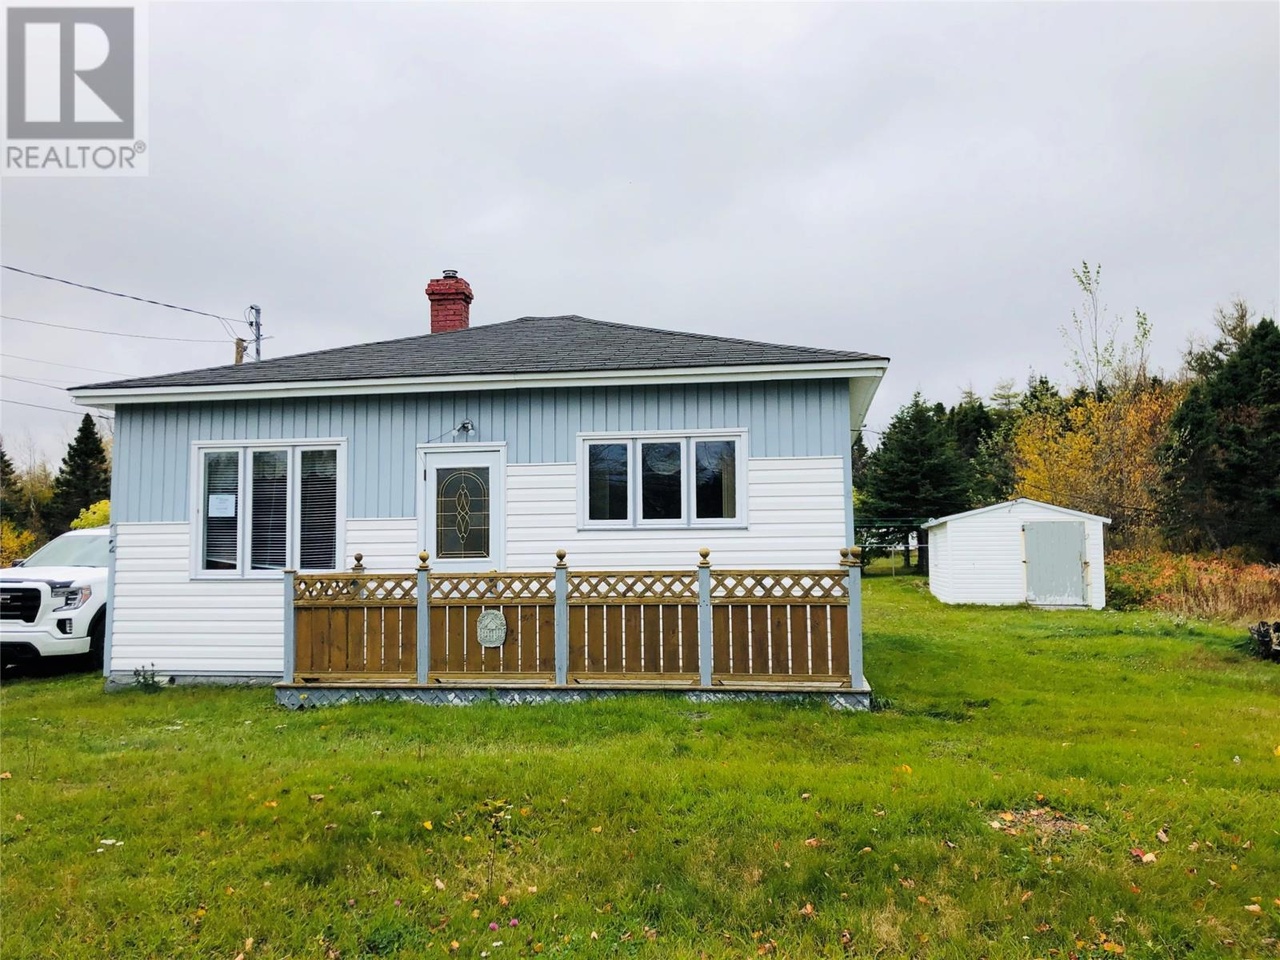 12 Main Rd, Brownsdale, NL A0B 0A9 | MLS# 1212729 | Redfin